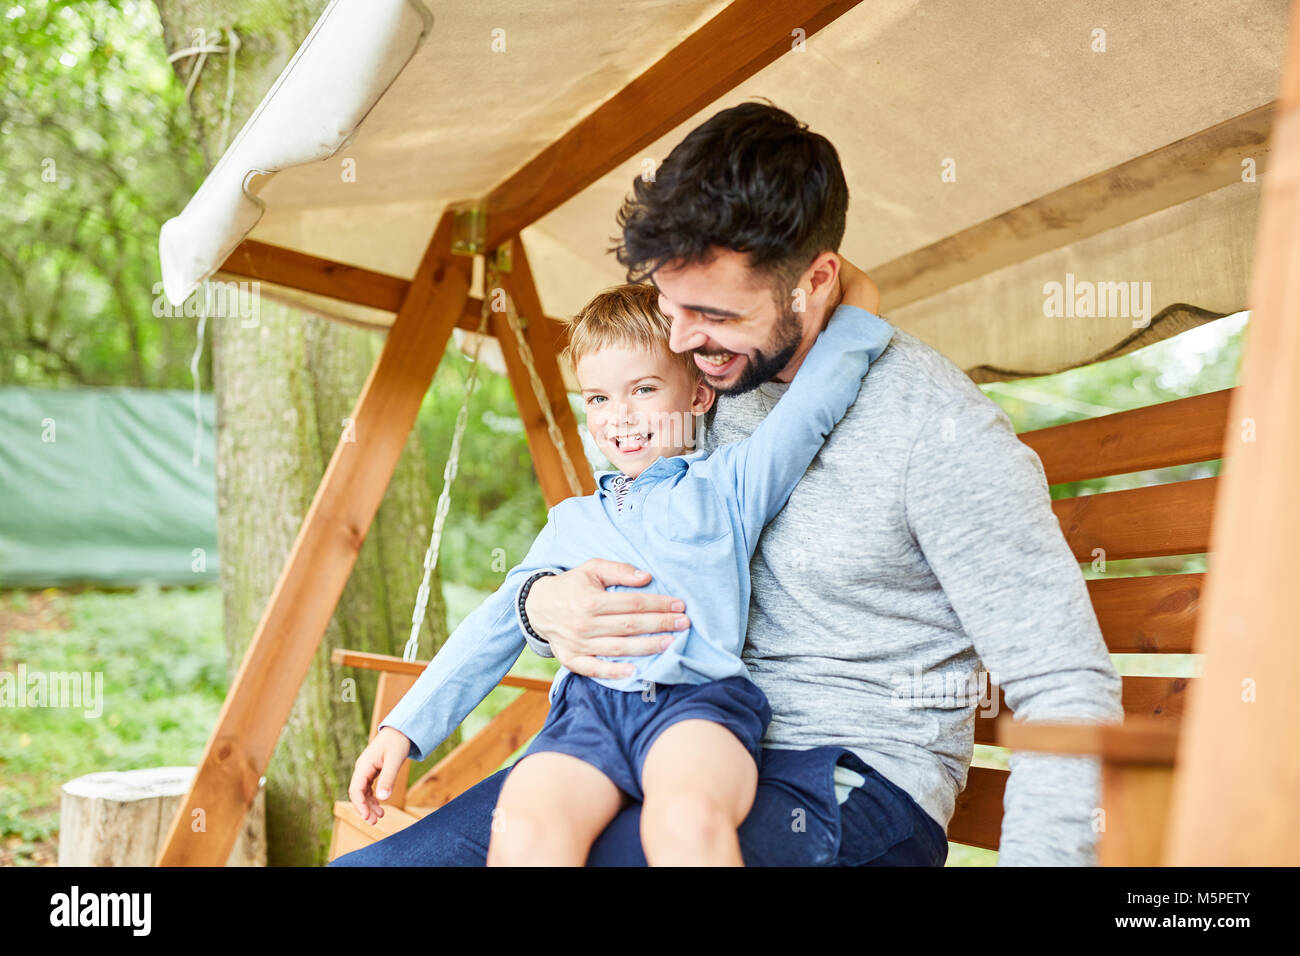 Father and son are silly with each other on the garden swing in the garden Stock Photo